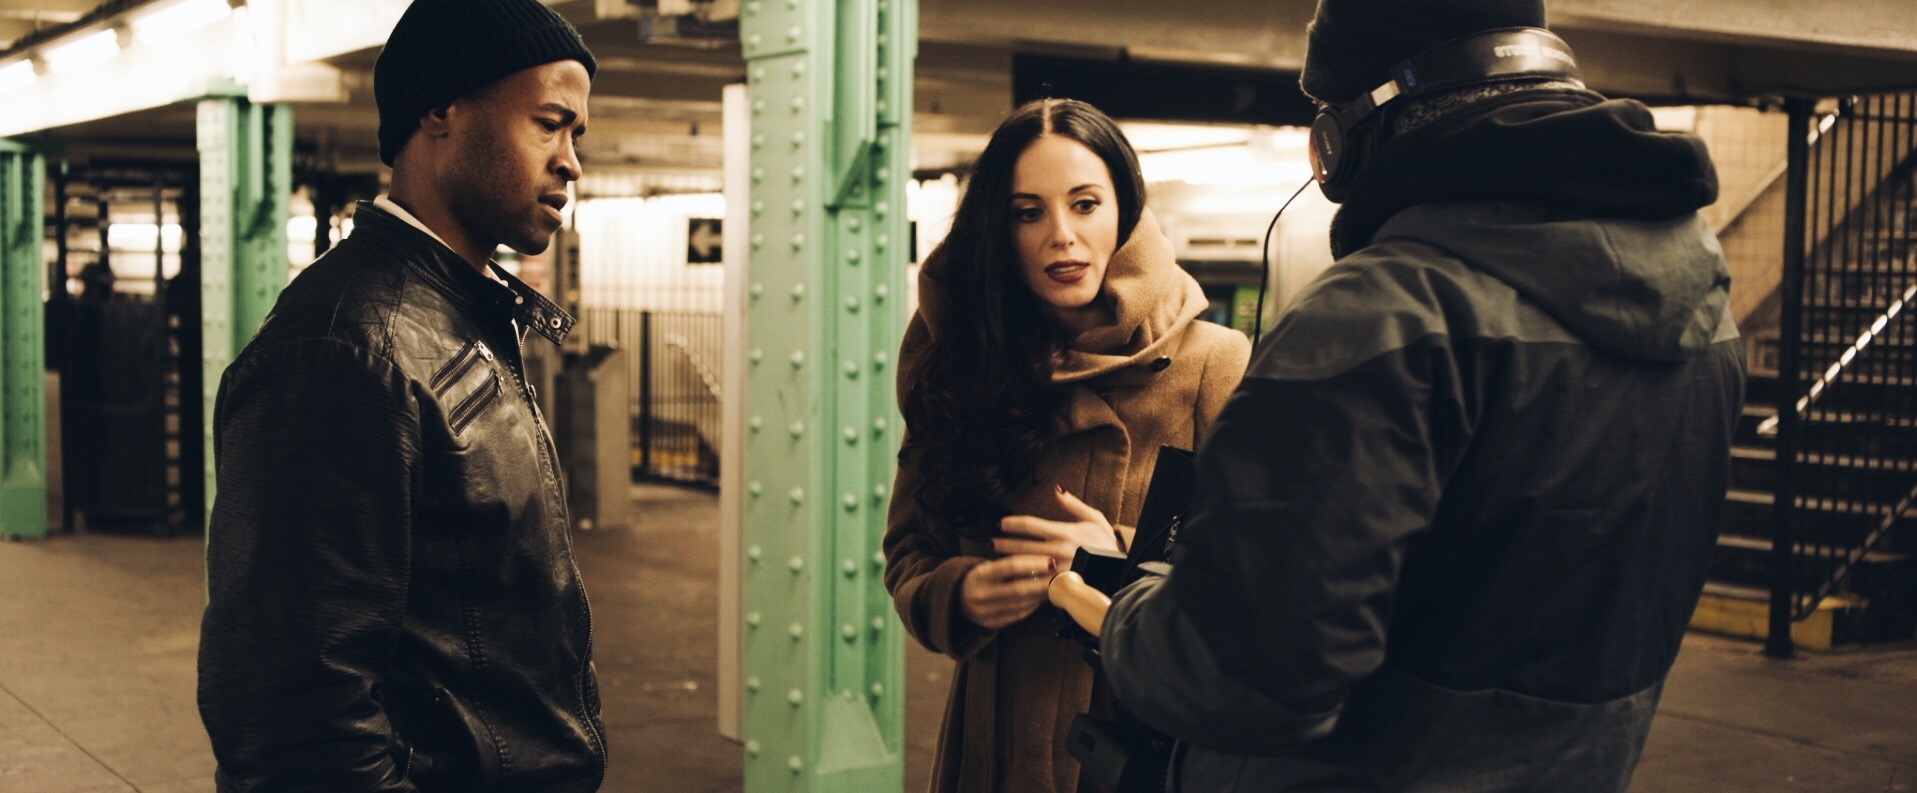 Feature film and televisions series production services by C&I Studios Crew member talking to man and woman in a subway